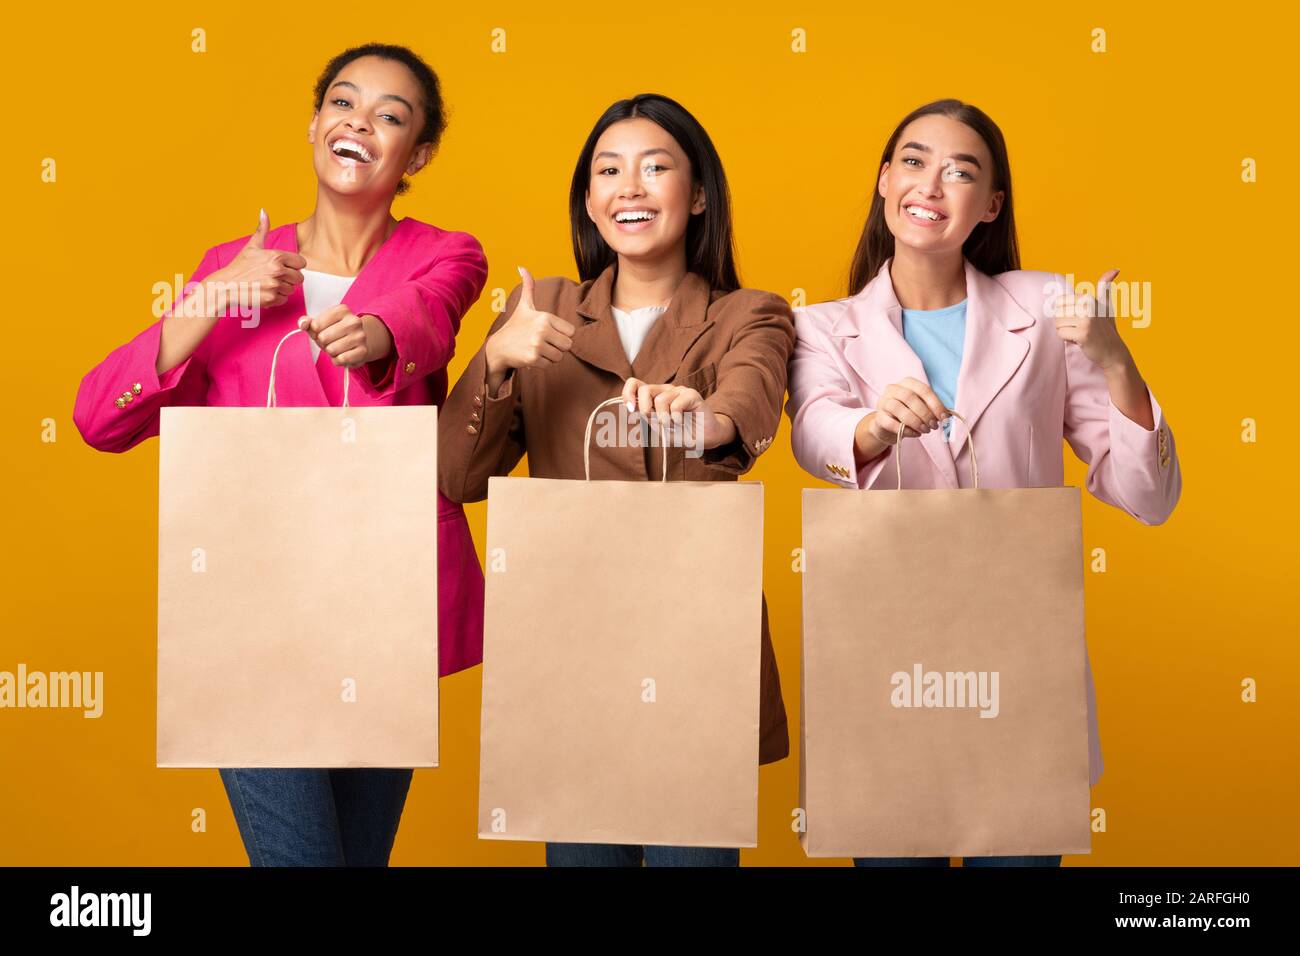 Three Girls Showing Shopper Bags Gesturing Thumbs-Up Posing In Studio Stock Photo